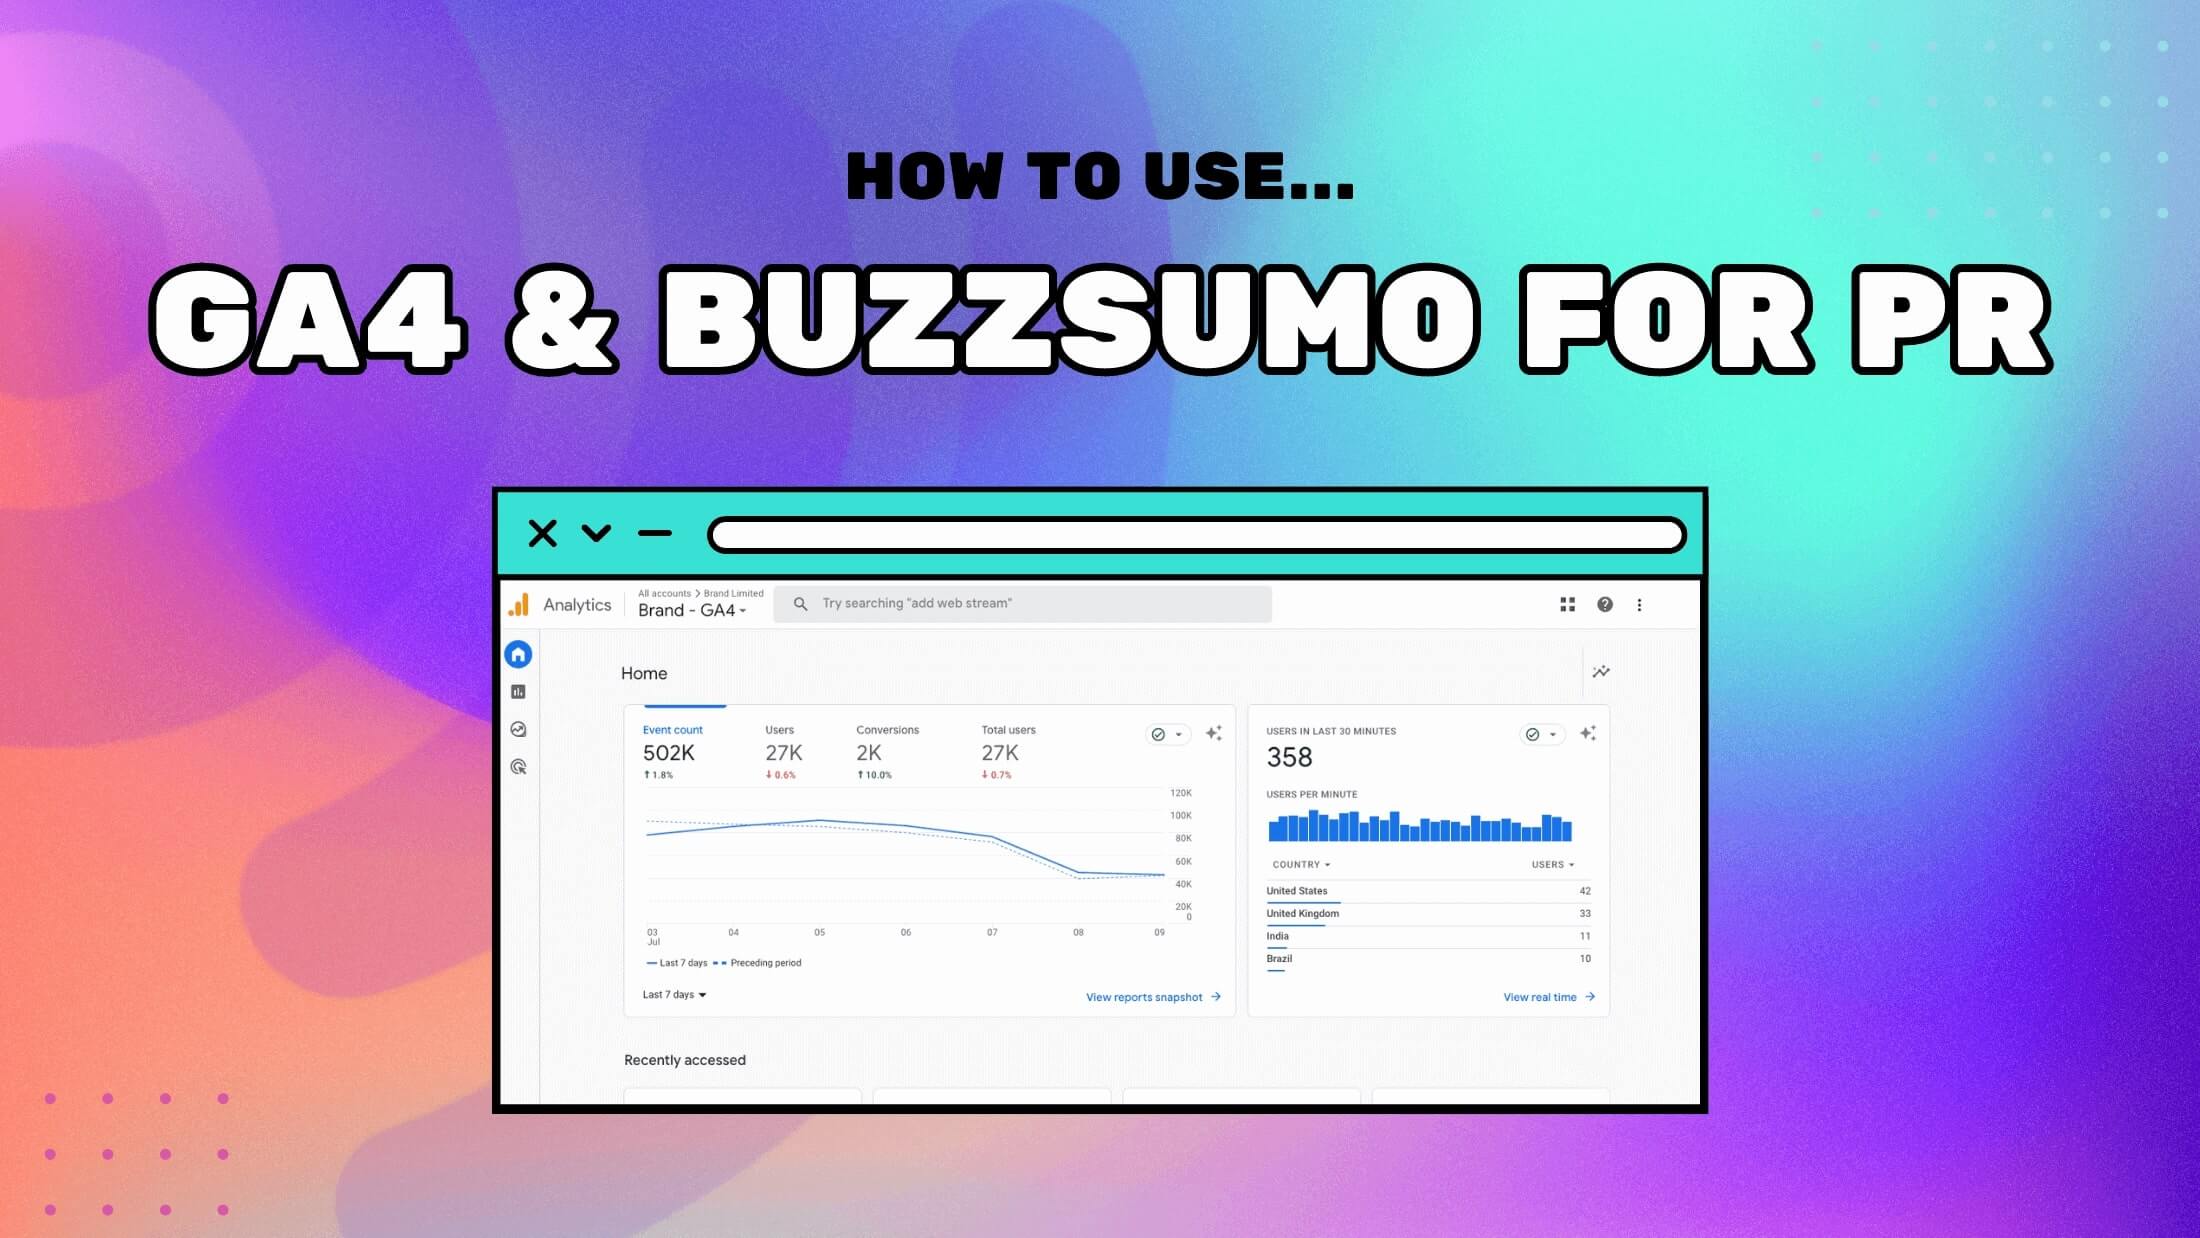 How PRs Can Use GA4 And BuzzSumo: A Step-By-Step Guide